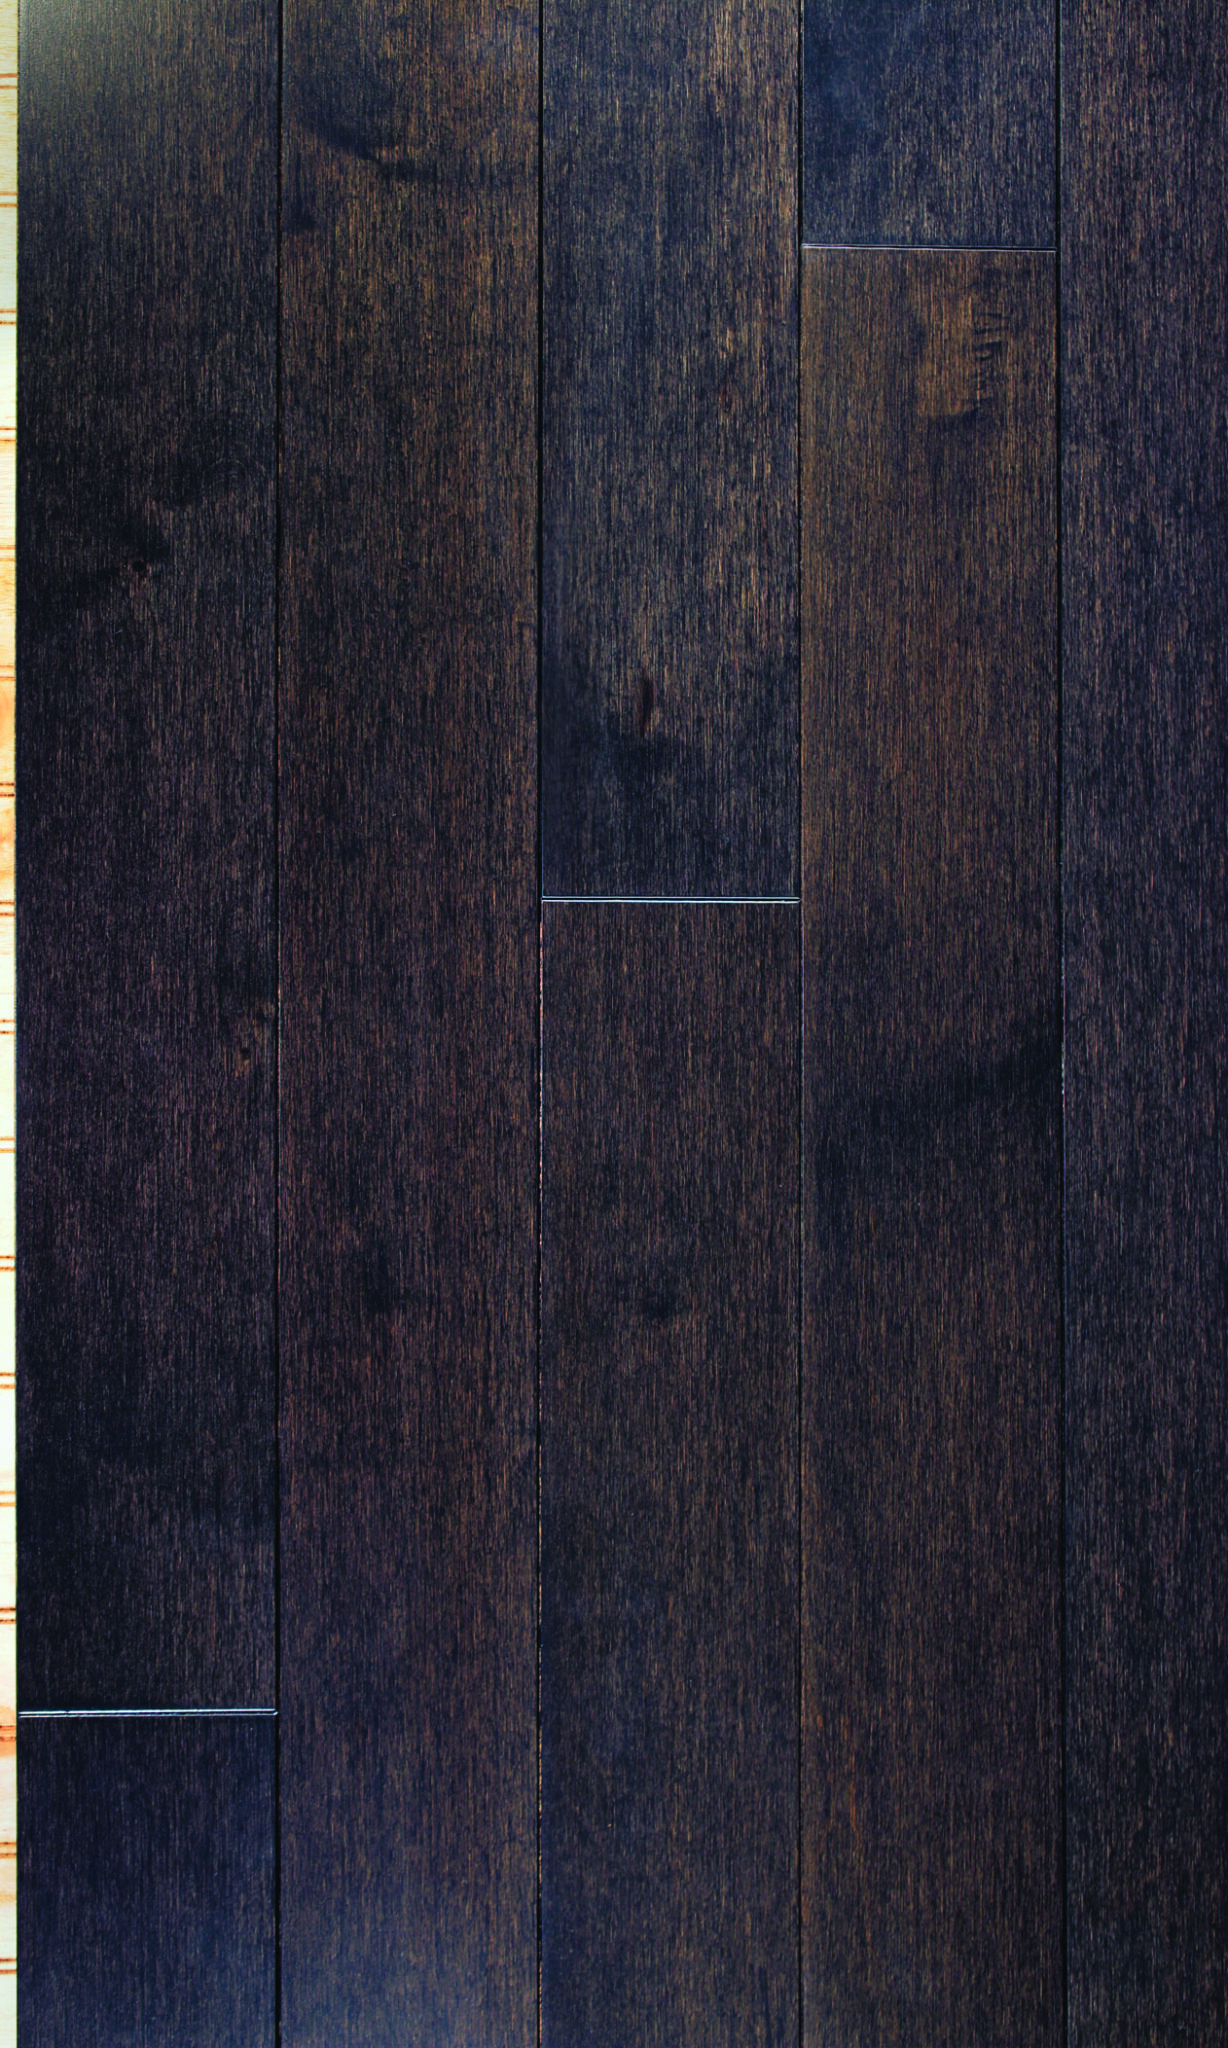 up-close photo swatch of midnight hardwood flooring from our classic collection